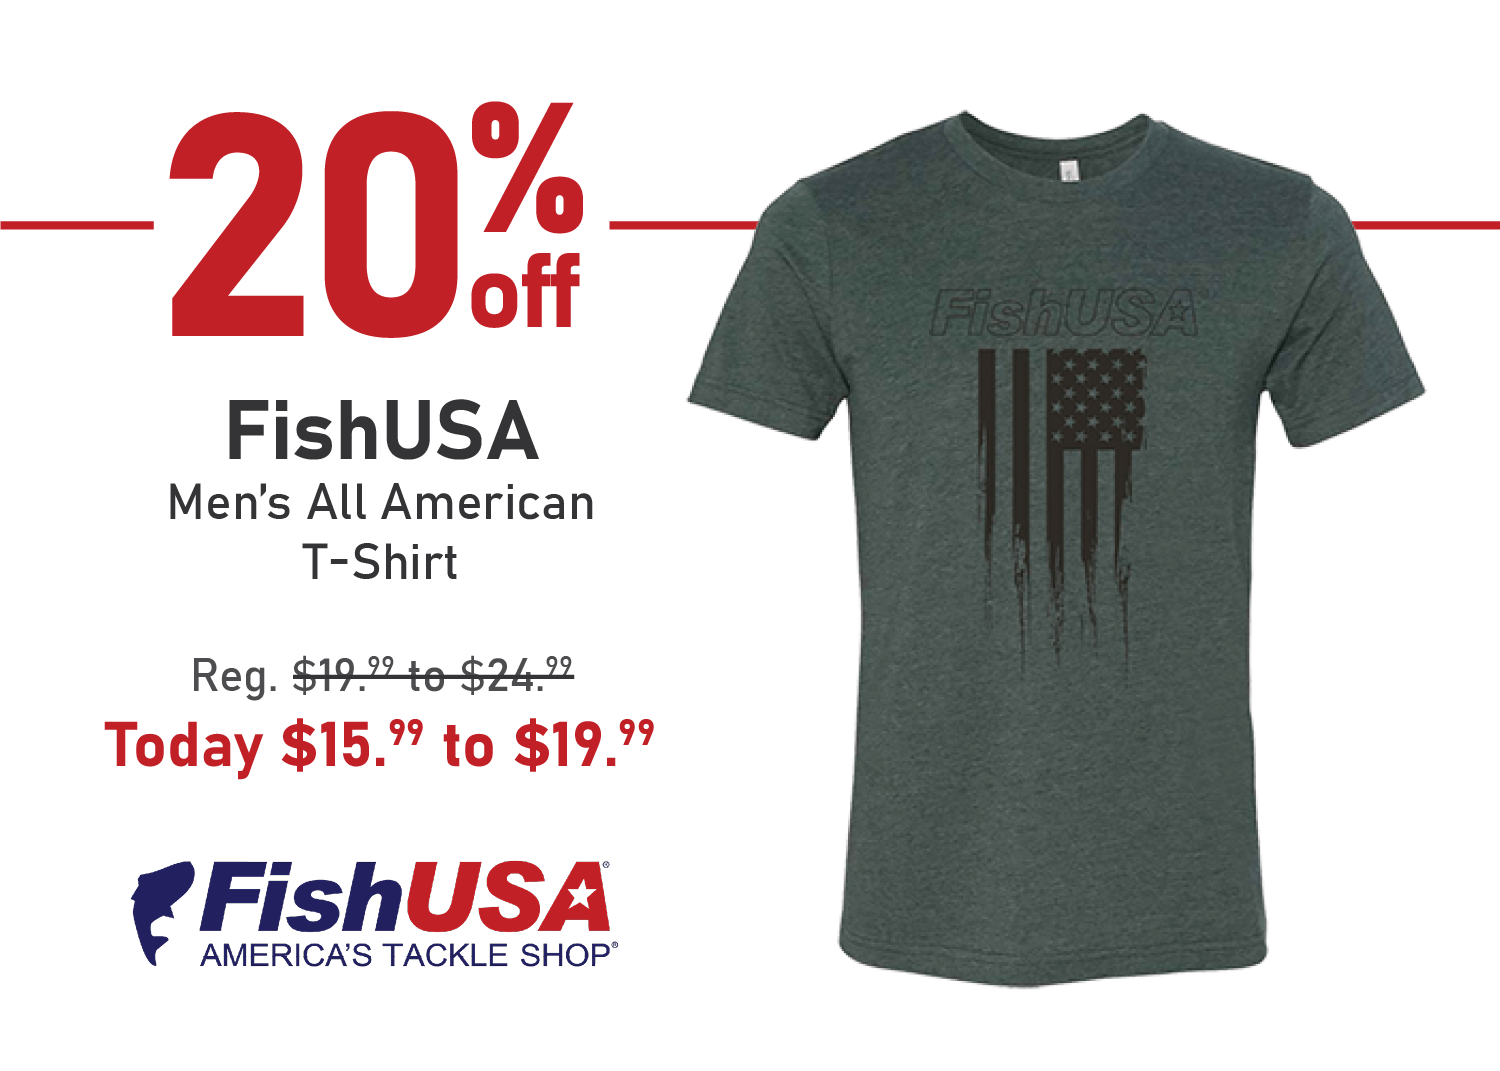 Save 20% on the FishUSA Men's All American T-Shirt